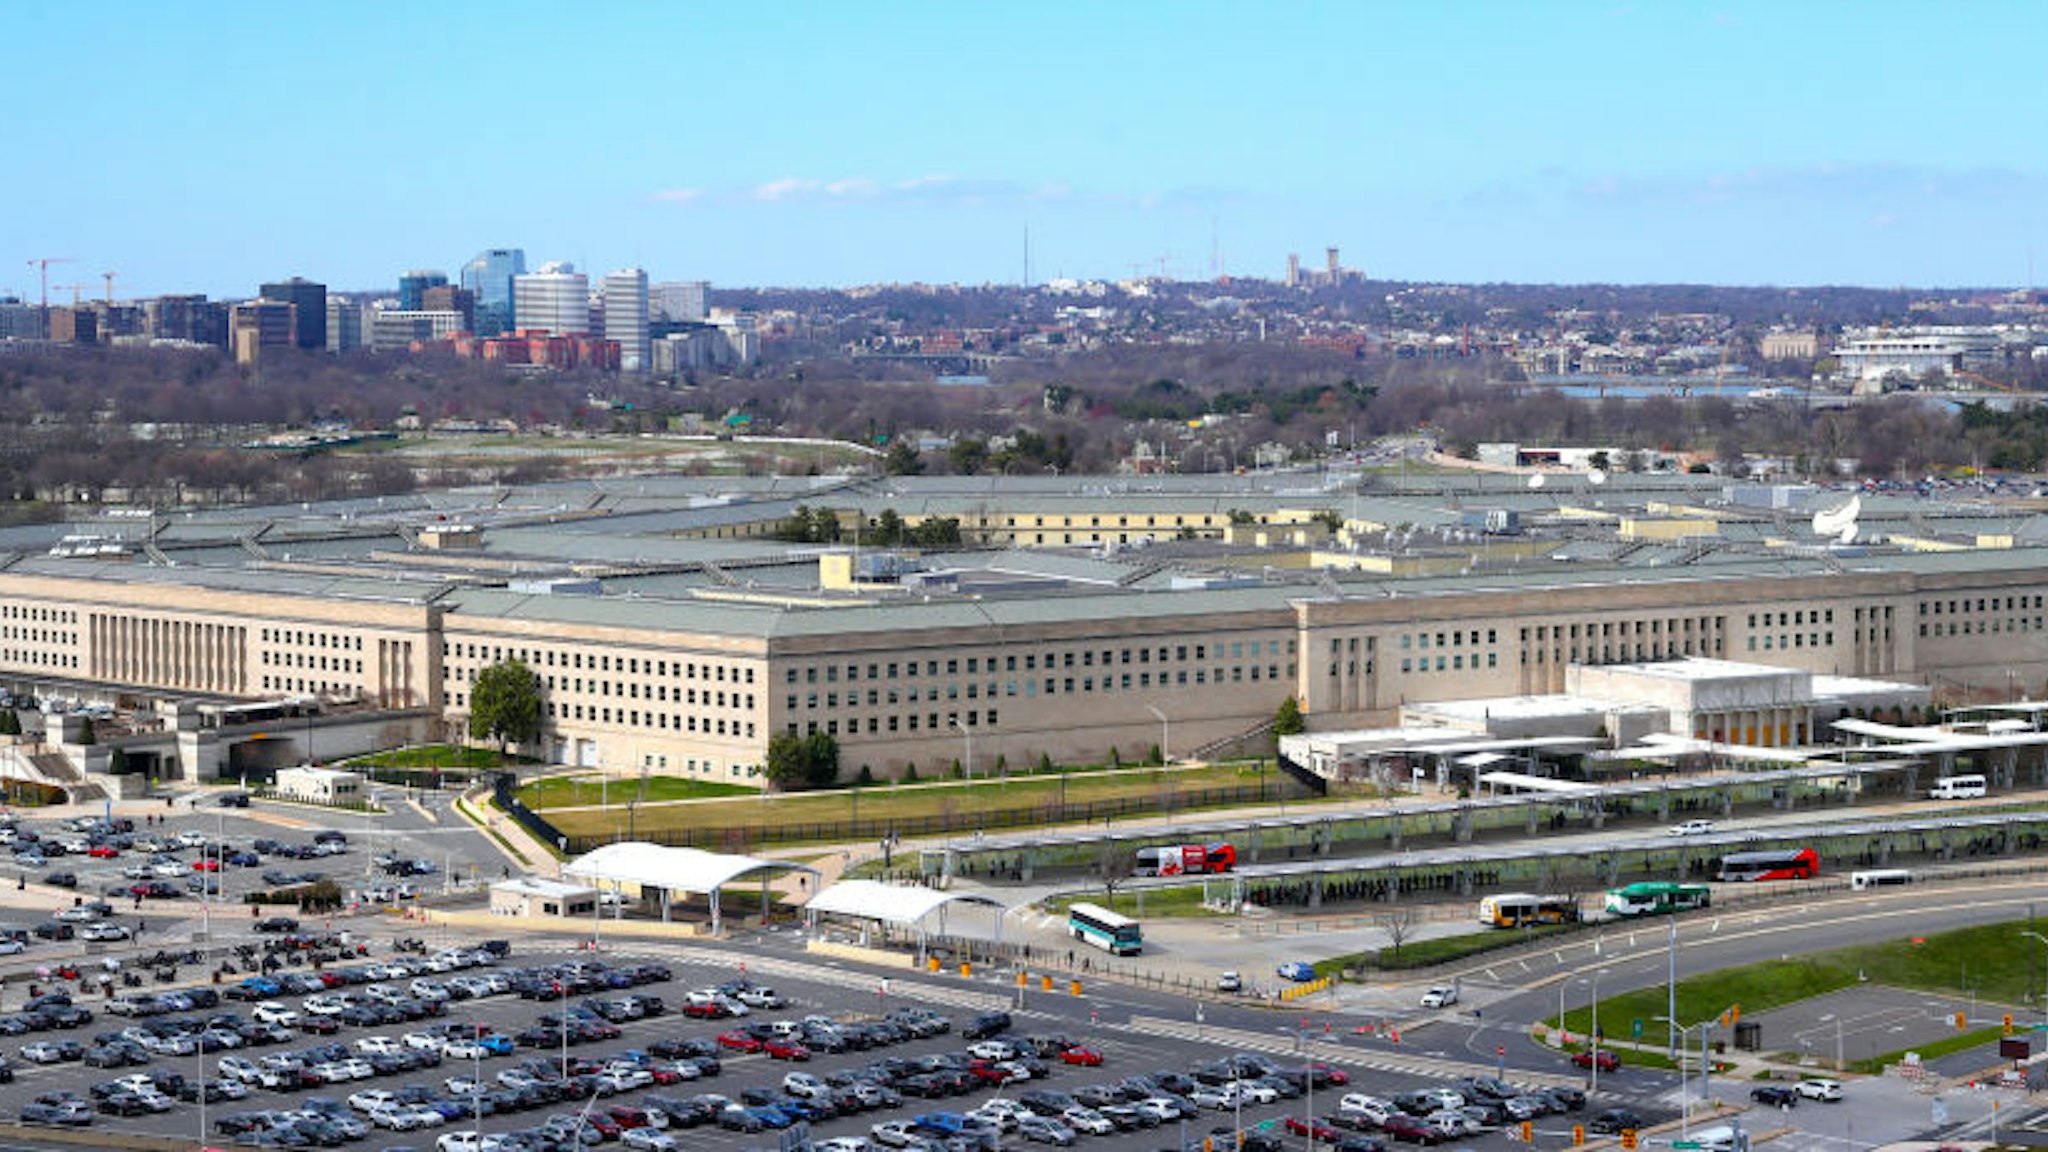 A general view of of the Pentagon ,headquarters of the US Department of Defense in Washington DC.